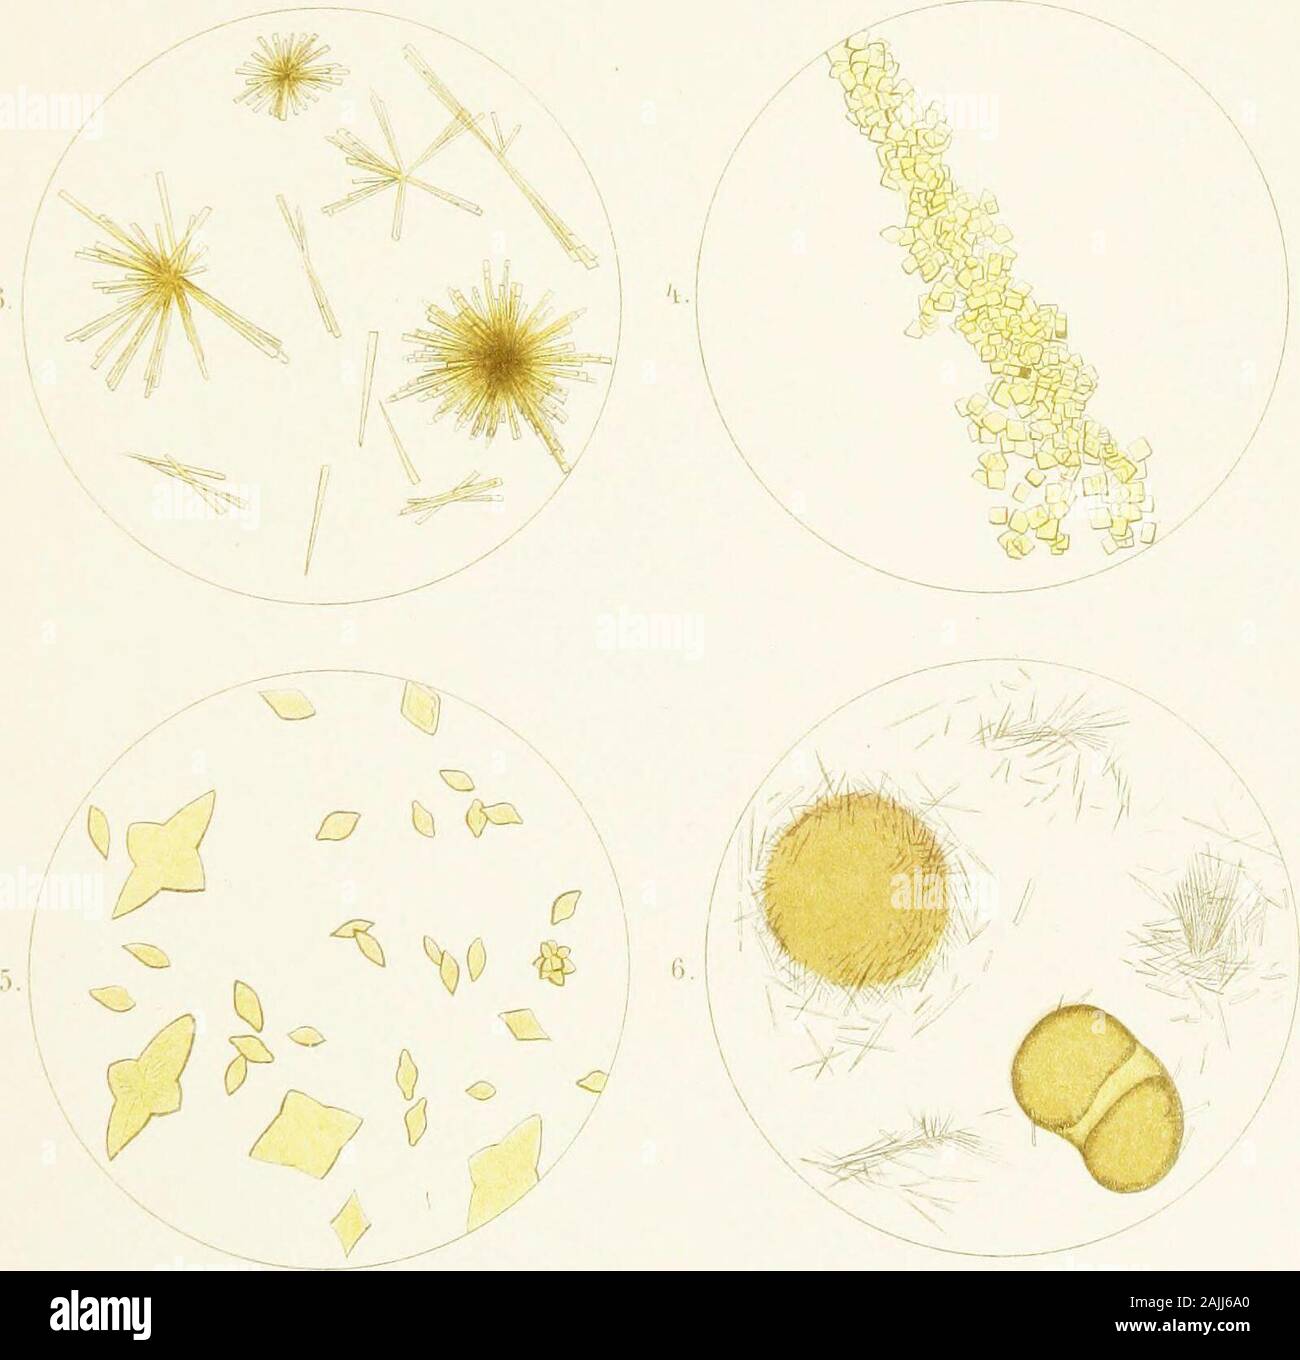 Atlas of urinary sediments; with special reference to their clinical significance . Lith AdSt.JiiliustOiiikharilt.leipjii;. PLATE VII. PLATE VII. Fig. 1. NEEDLES OP ITBIC ACID. Irregularly scattered and arranged intufts ; also numerous granules of AMORPHOUS URATES. [Needlespresenting appearances identical to those represented in this drawinghave been found, by the editor, to give the micro-chemical reactions ofurate of lime.] , From a tophus. Fm. 2. AMORPHOUS URATE GRANULES of pale yellowish colour, aggre-gated in small groups. [Compare with Fig. 6, Plate V.] Fig. 3. ACID AMMONIUM URATE. Small Stock Photo